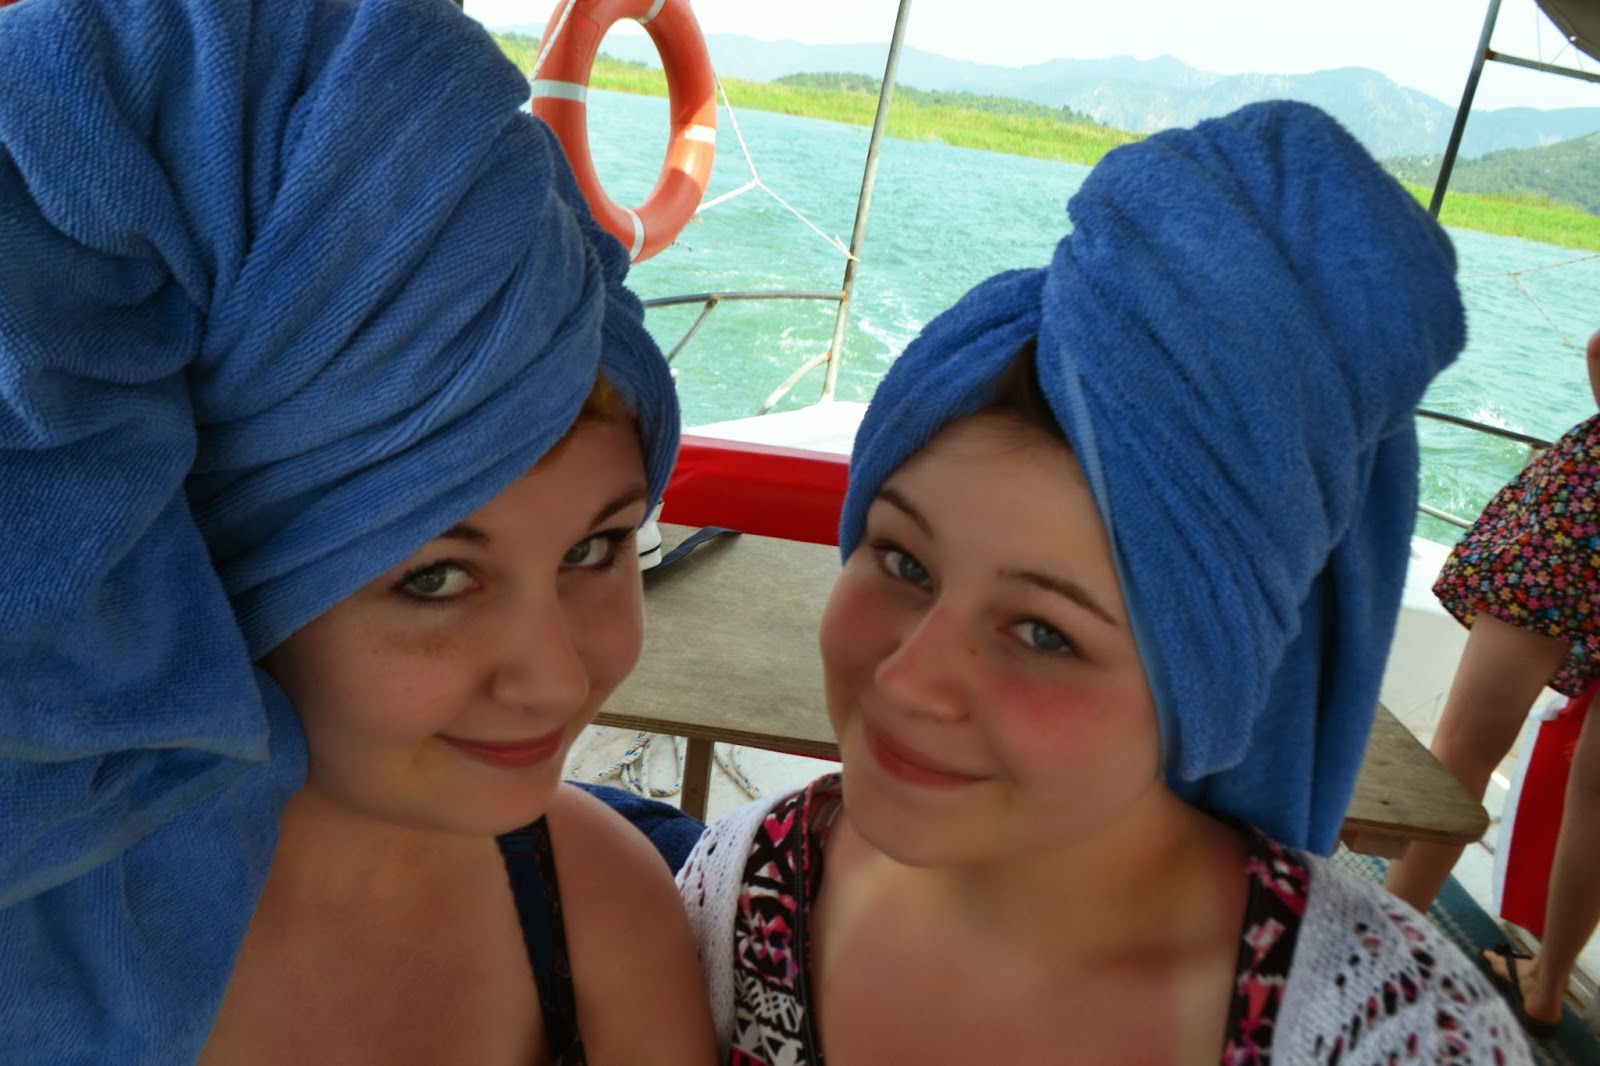 myself and my sister with beach towels on our heads as we take the boat back to Dalyan harbour